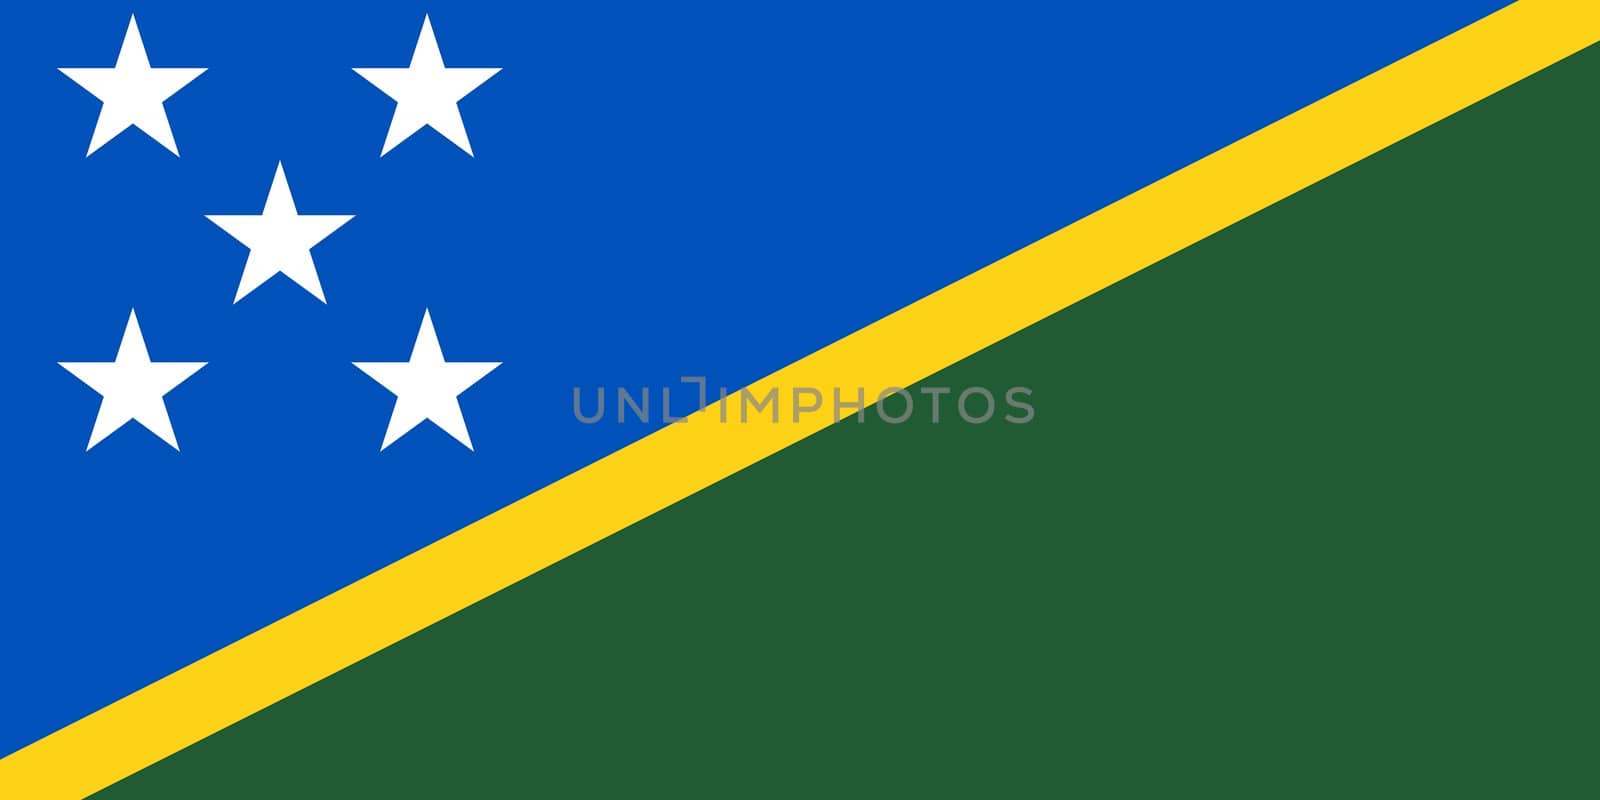 The national flag of Solomon Islands